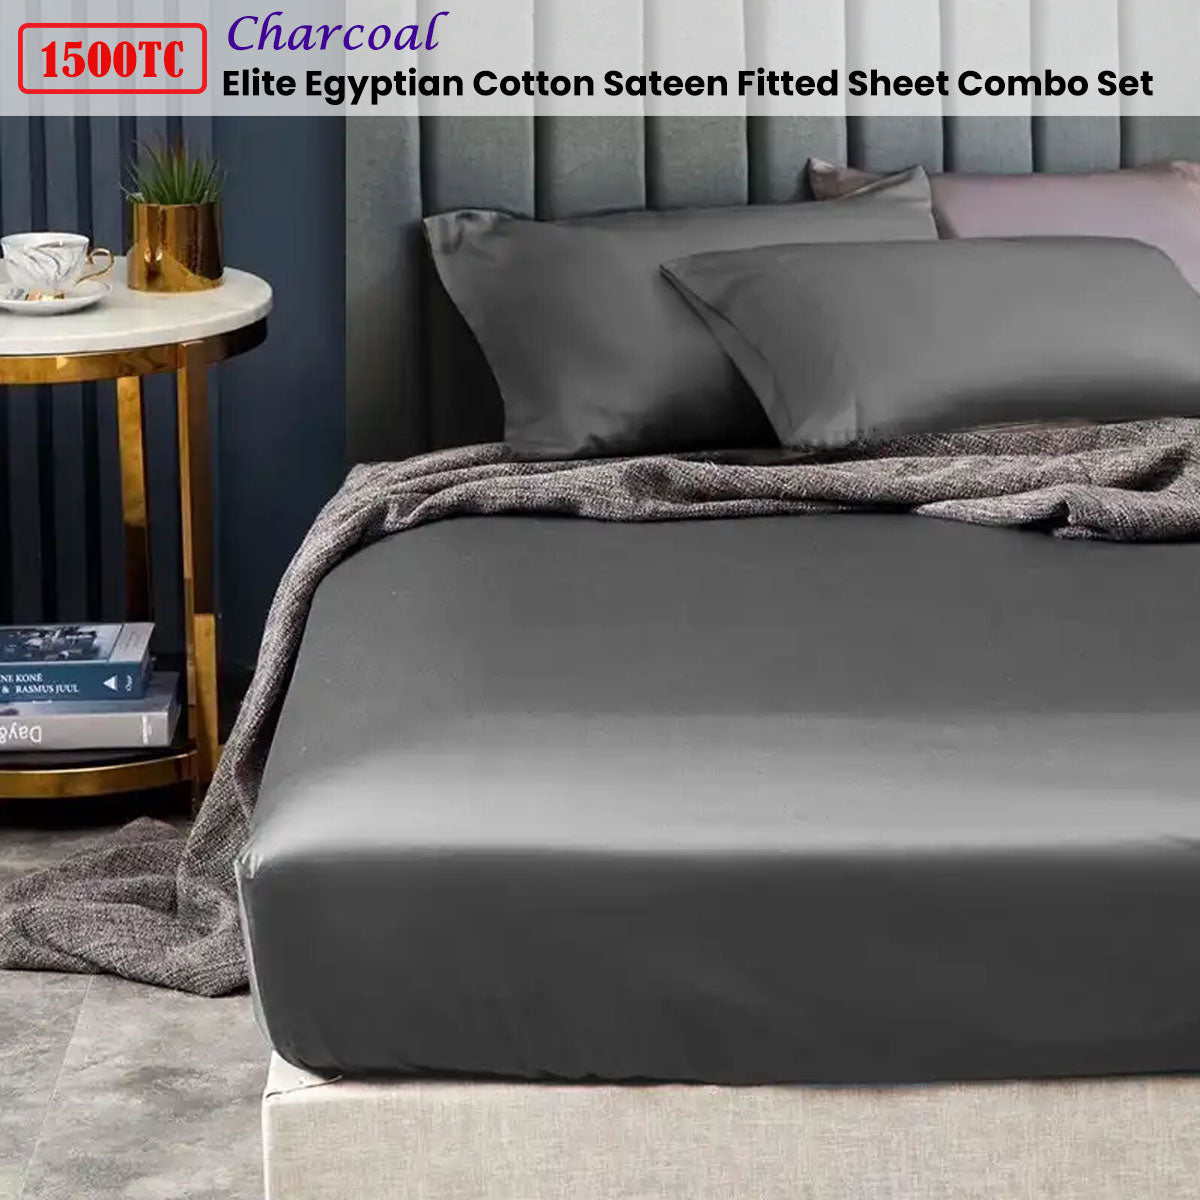 1500TC Elite Egyptian Cotton Sateen Fitted Sheet Combo Set Charcoal Queen